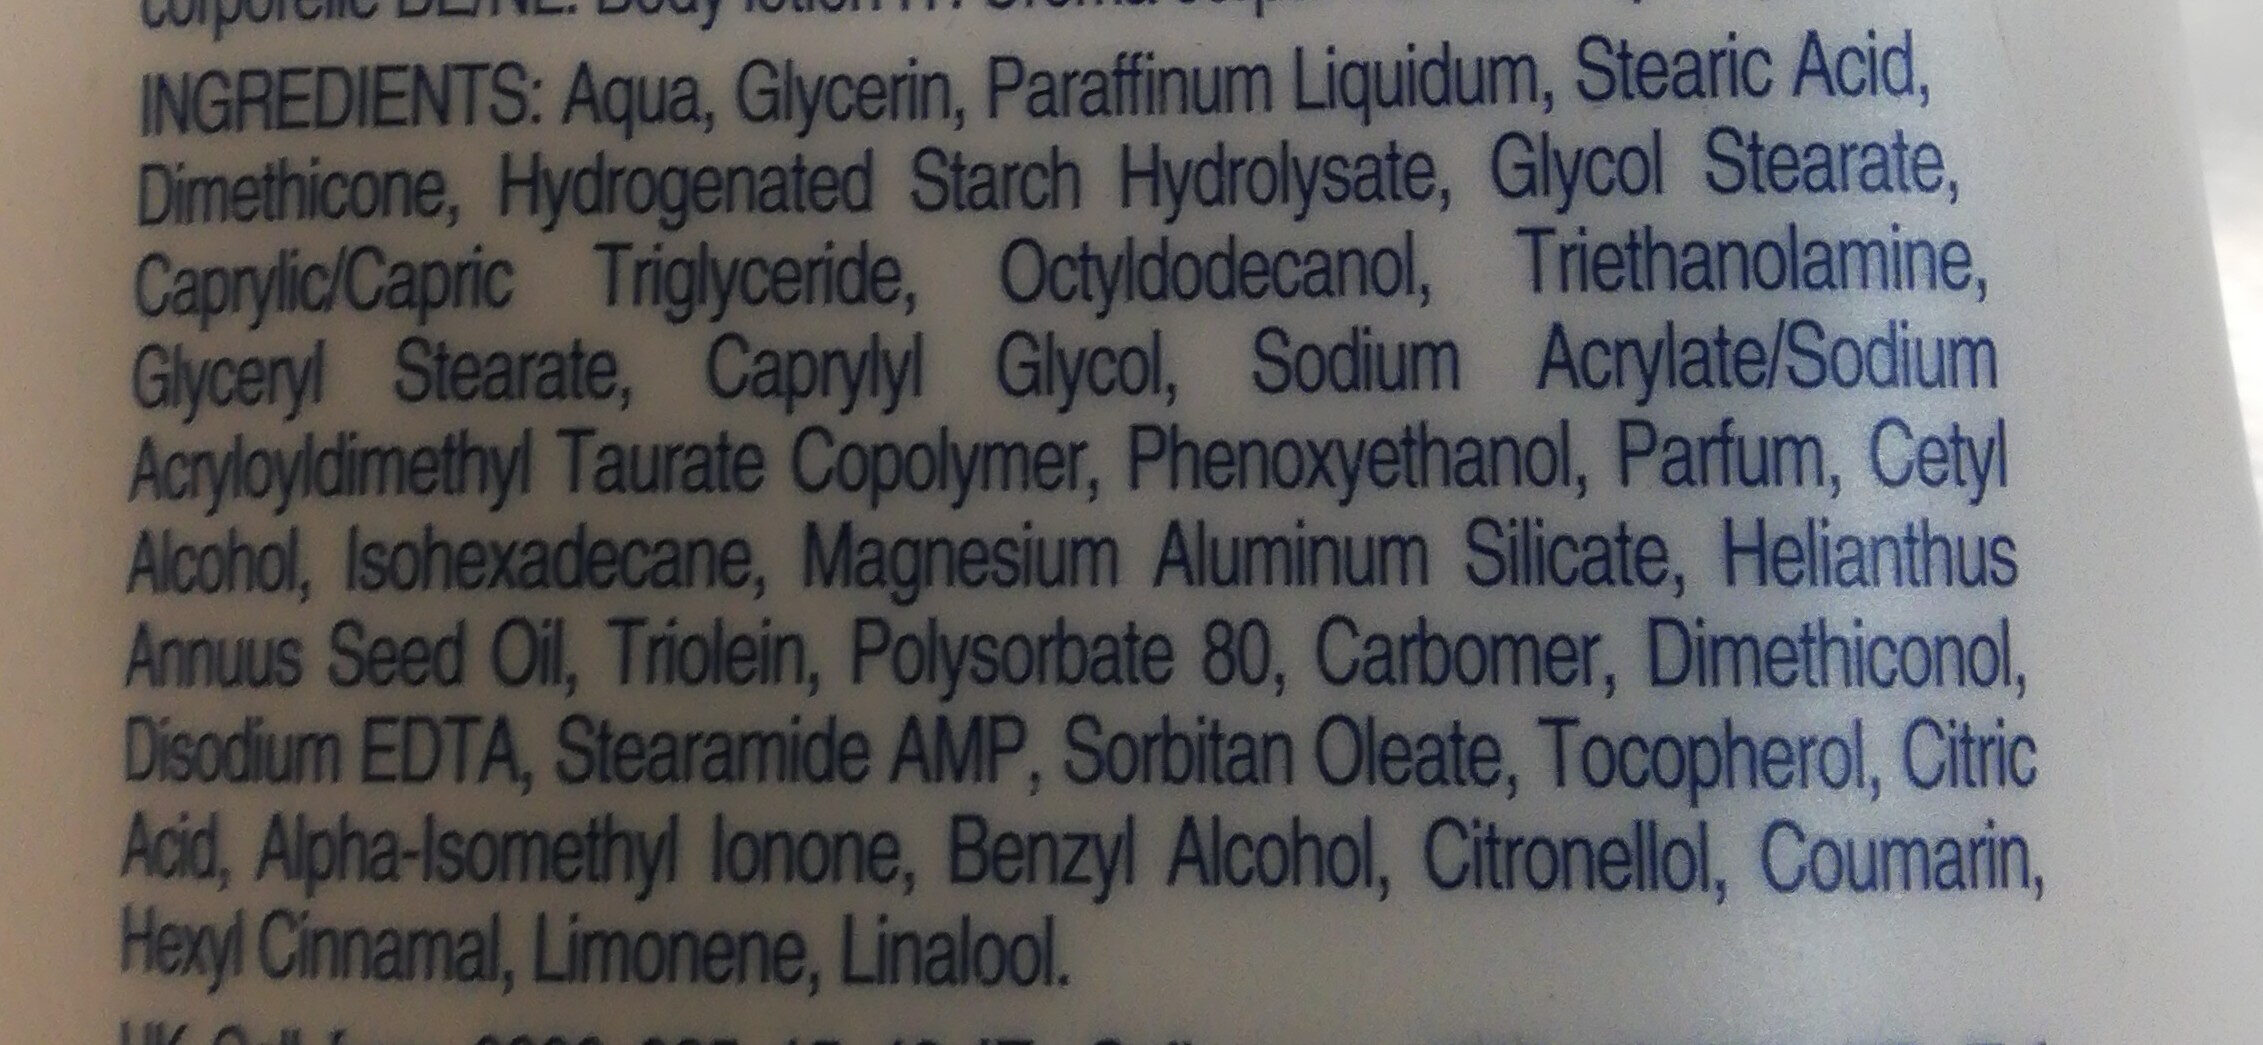 Light care body lotion - Ingredients - nl